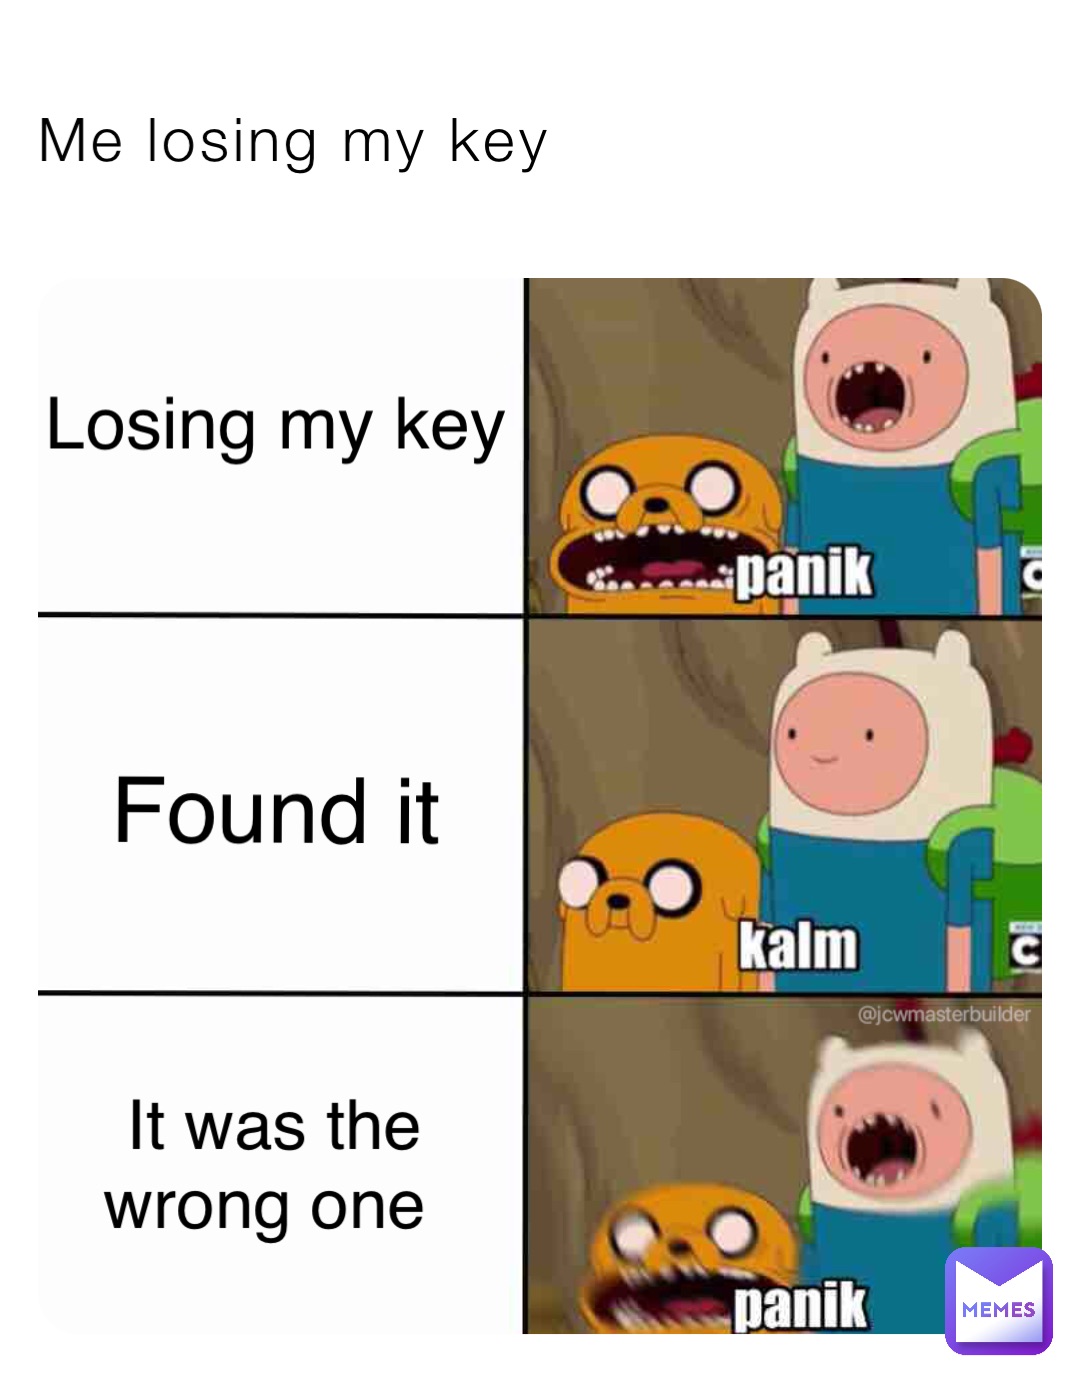 Me losing my key Losing my key Found it It was the 
wrong one One One